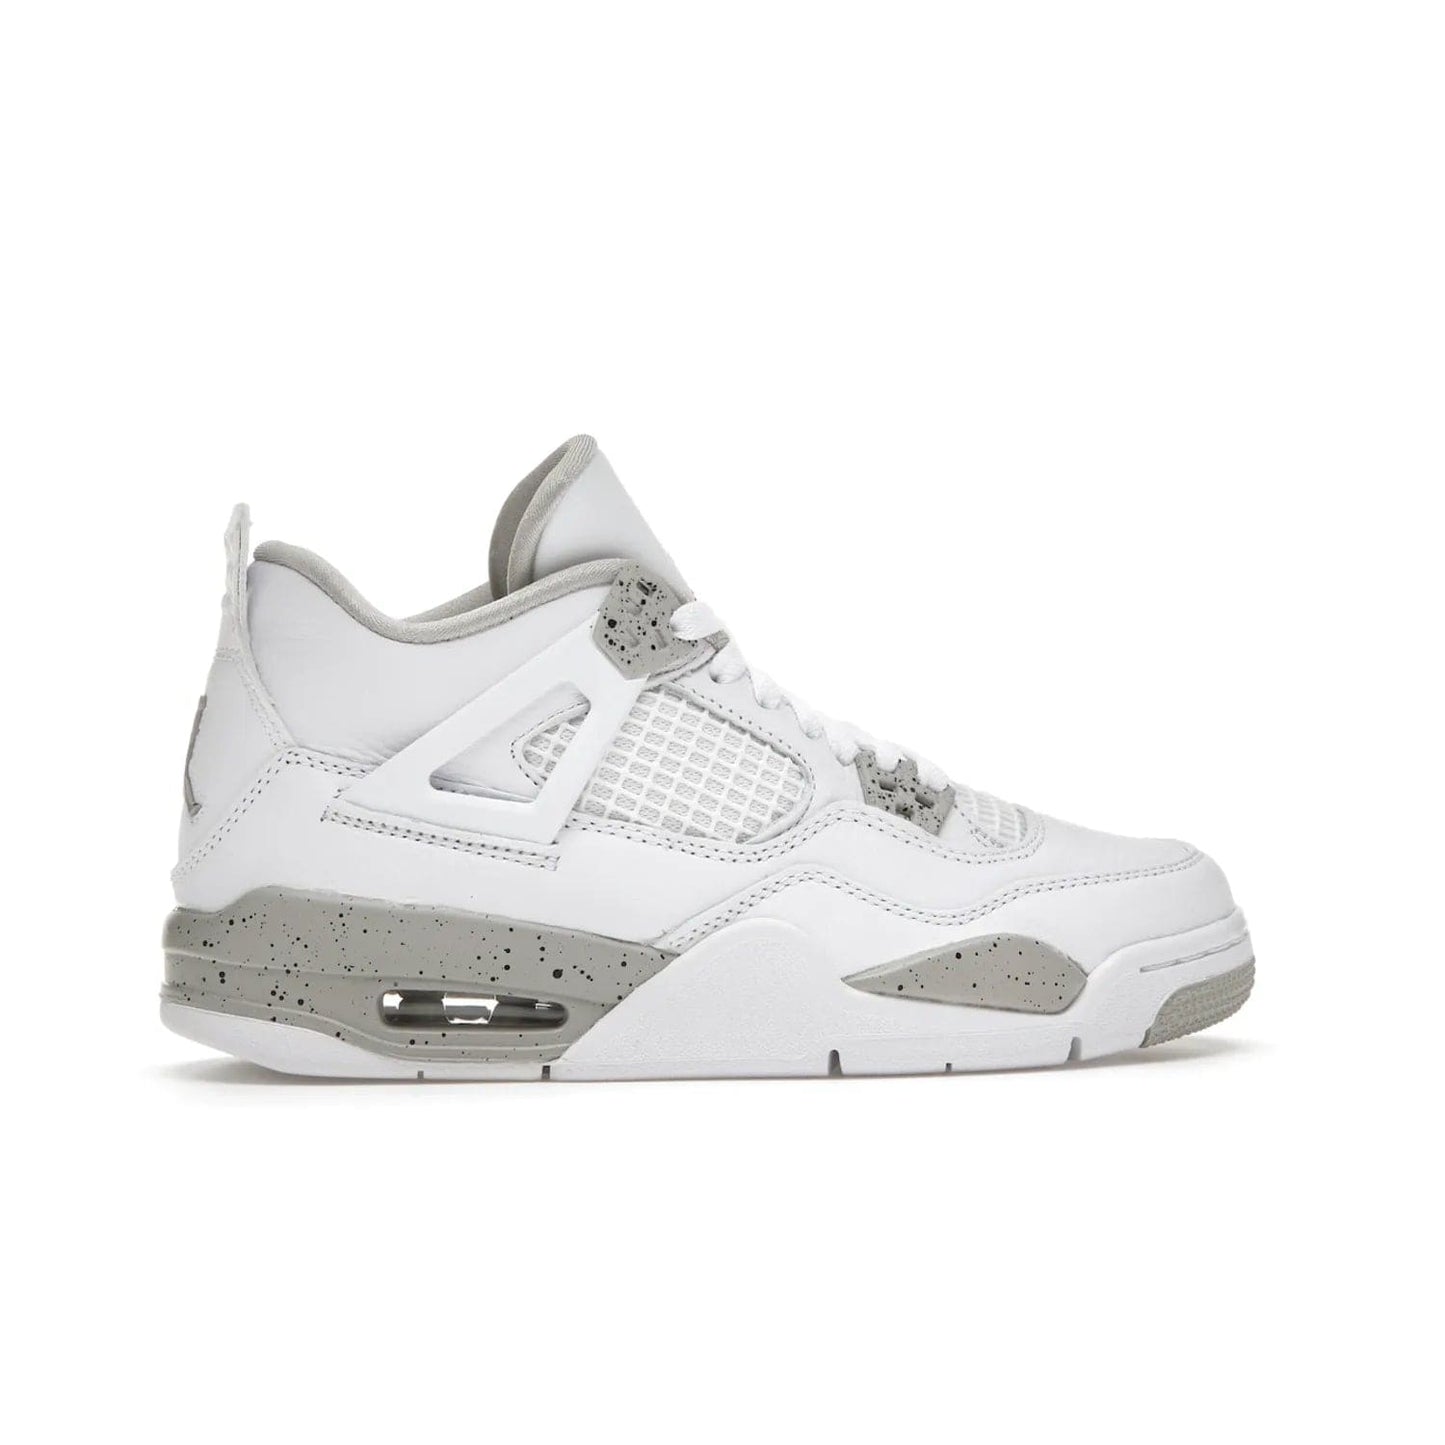 Jordan 4 Retro White Oreo (2021) (GS) - Image 36 - Only at www.BallersClubKickz.com - White Oreo Air Jordan 4 Retro 2021 GS - Iconic sneaker silhouette with white canvas upper, Tech Grey detailing, and Fire Red accents. Available July 2021.